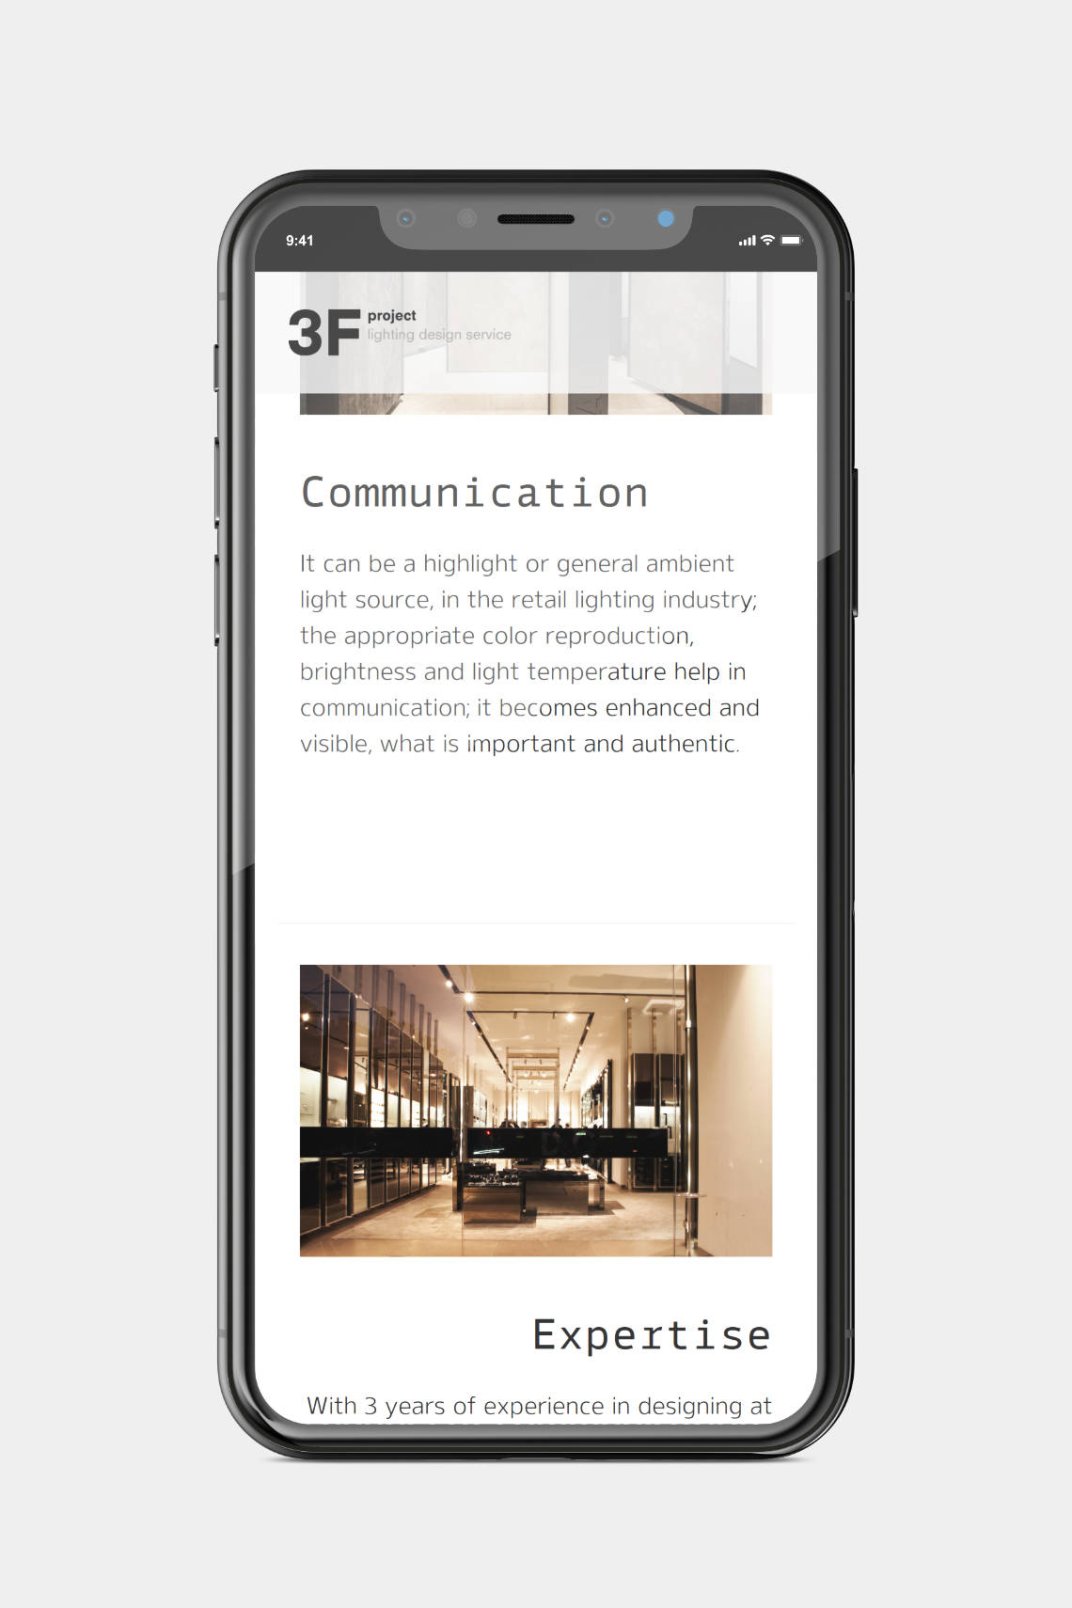 Landing page design, and bespoke WordPress website building for 3F Project's retail lighting service home page on phone